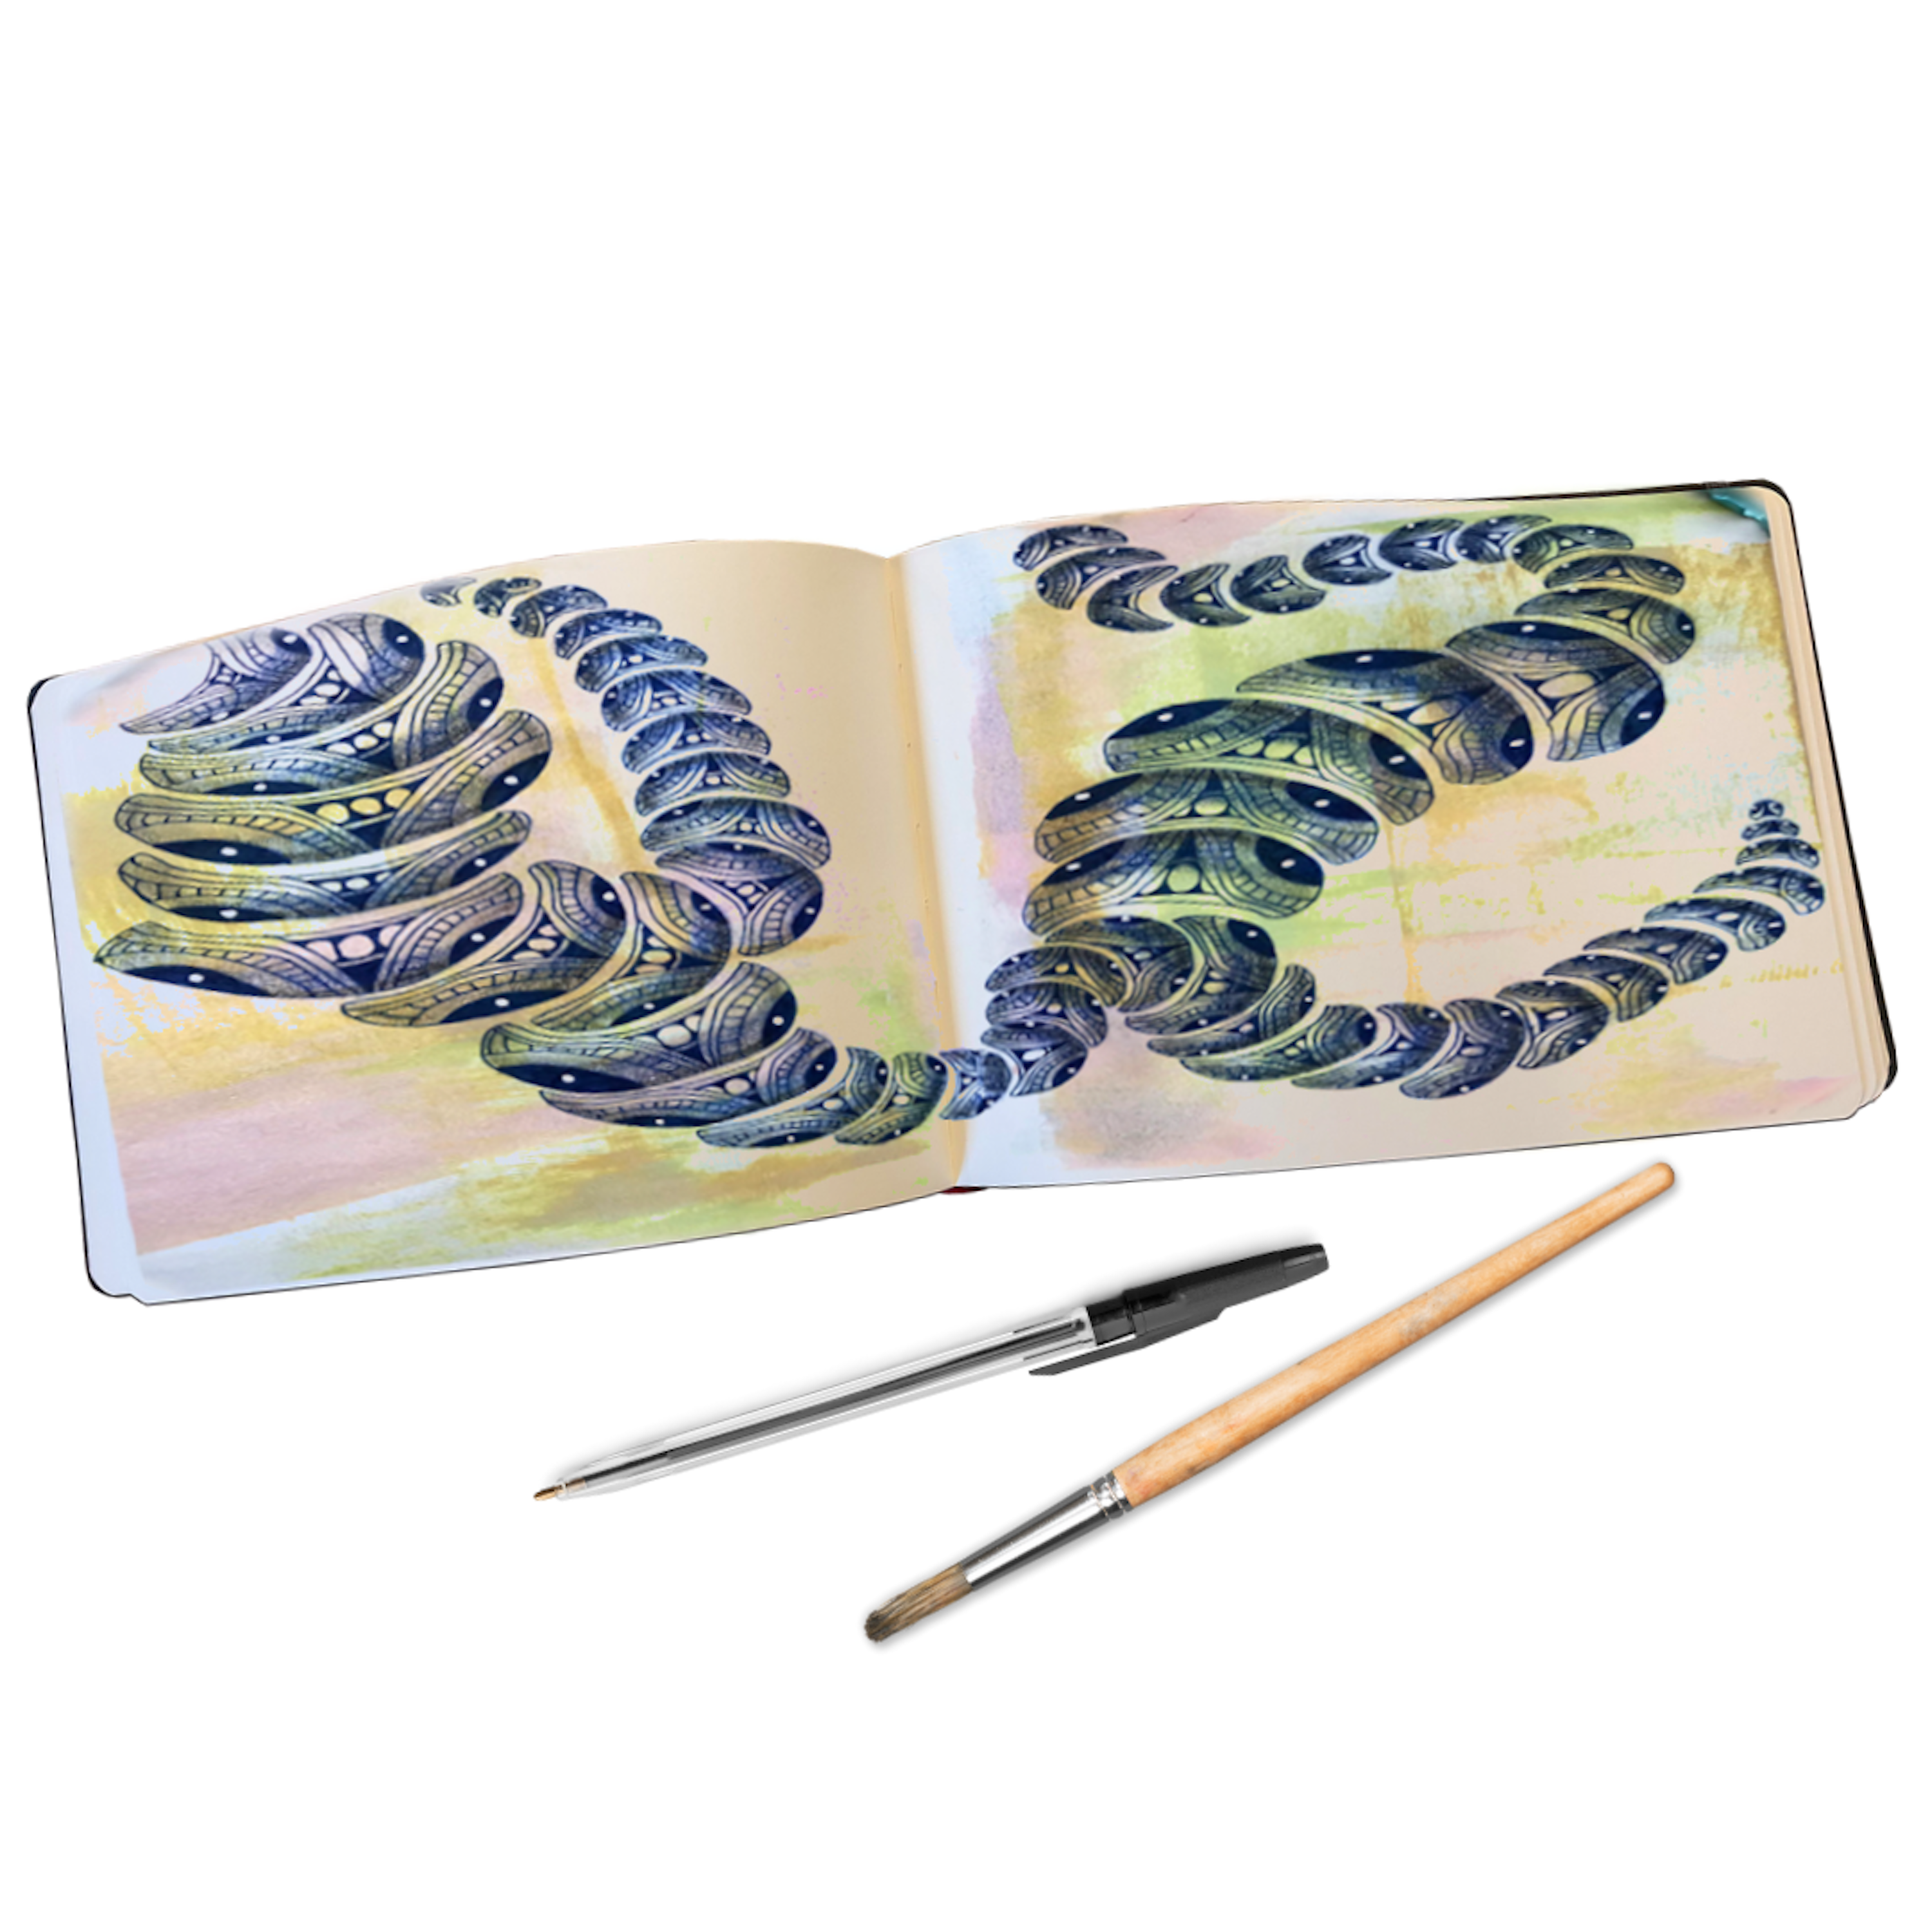 Landscape-Shaped Sketchbook, 8.25 x 5.5 inches, Lays Flat Flexible Sketchbook for artists, Ideal for Ink, Water Color, Pen, Pencils, 160 Premium Art Pages